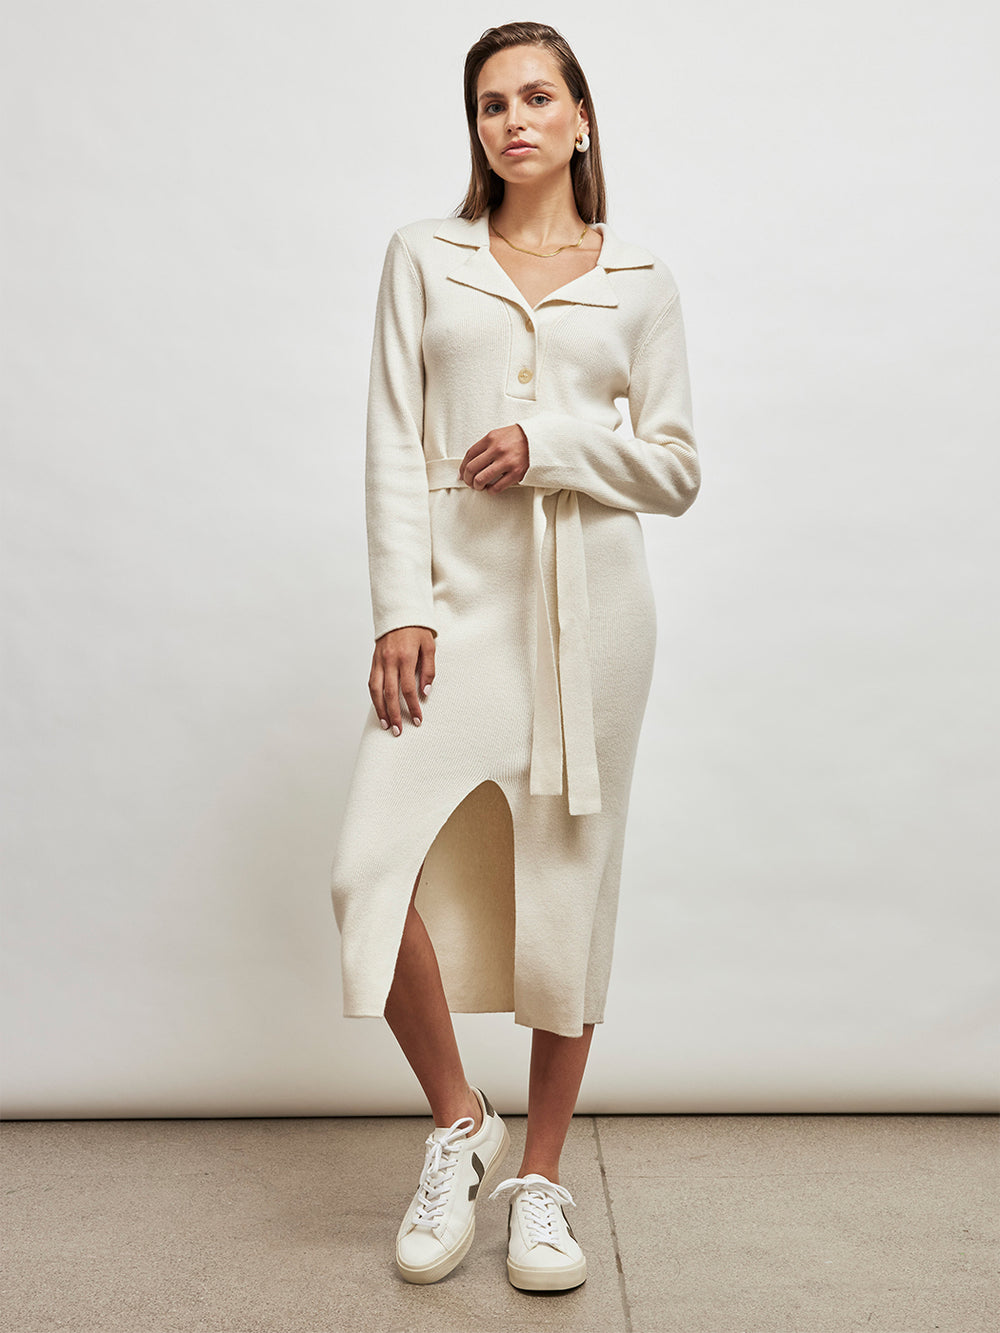 Collared Belted Dress - Ivory